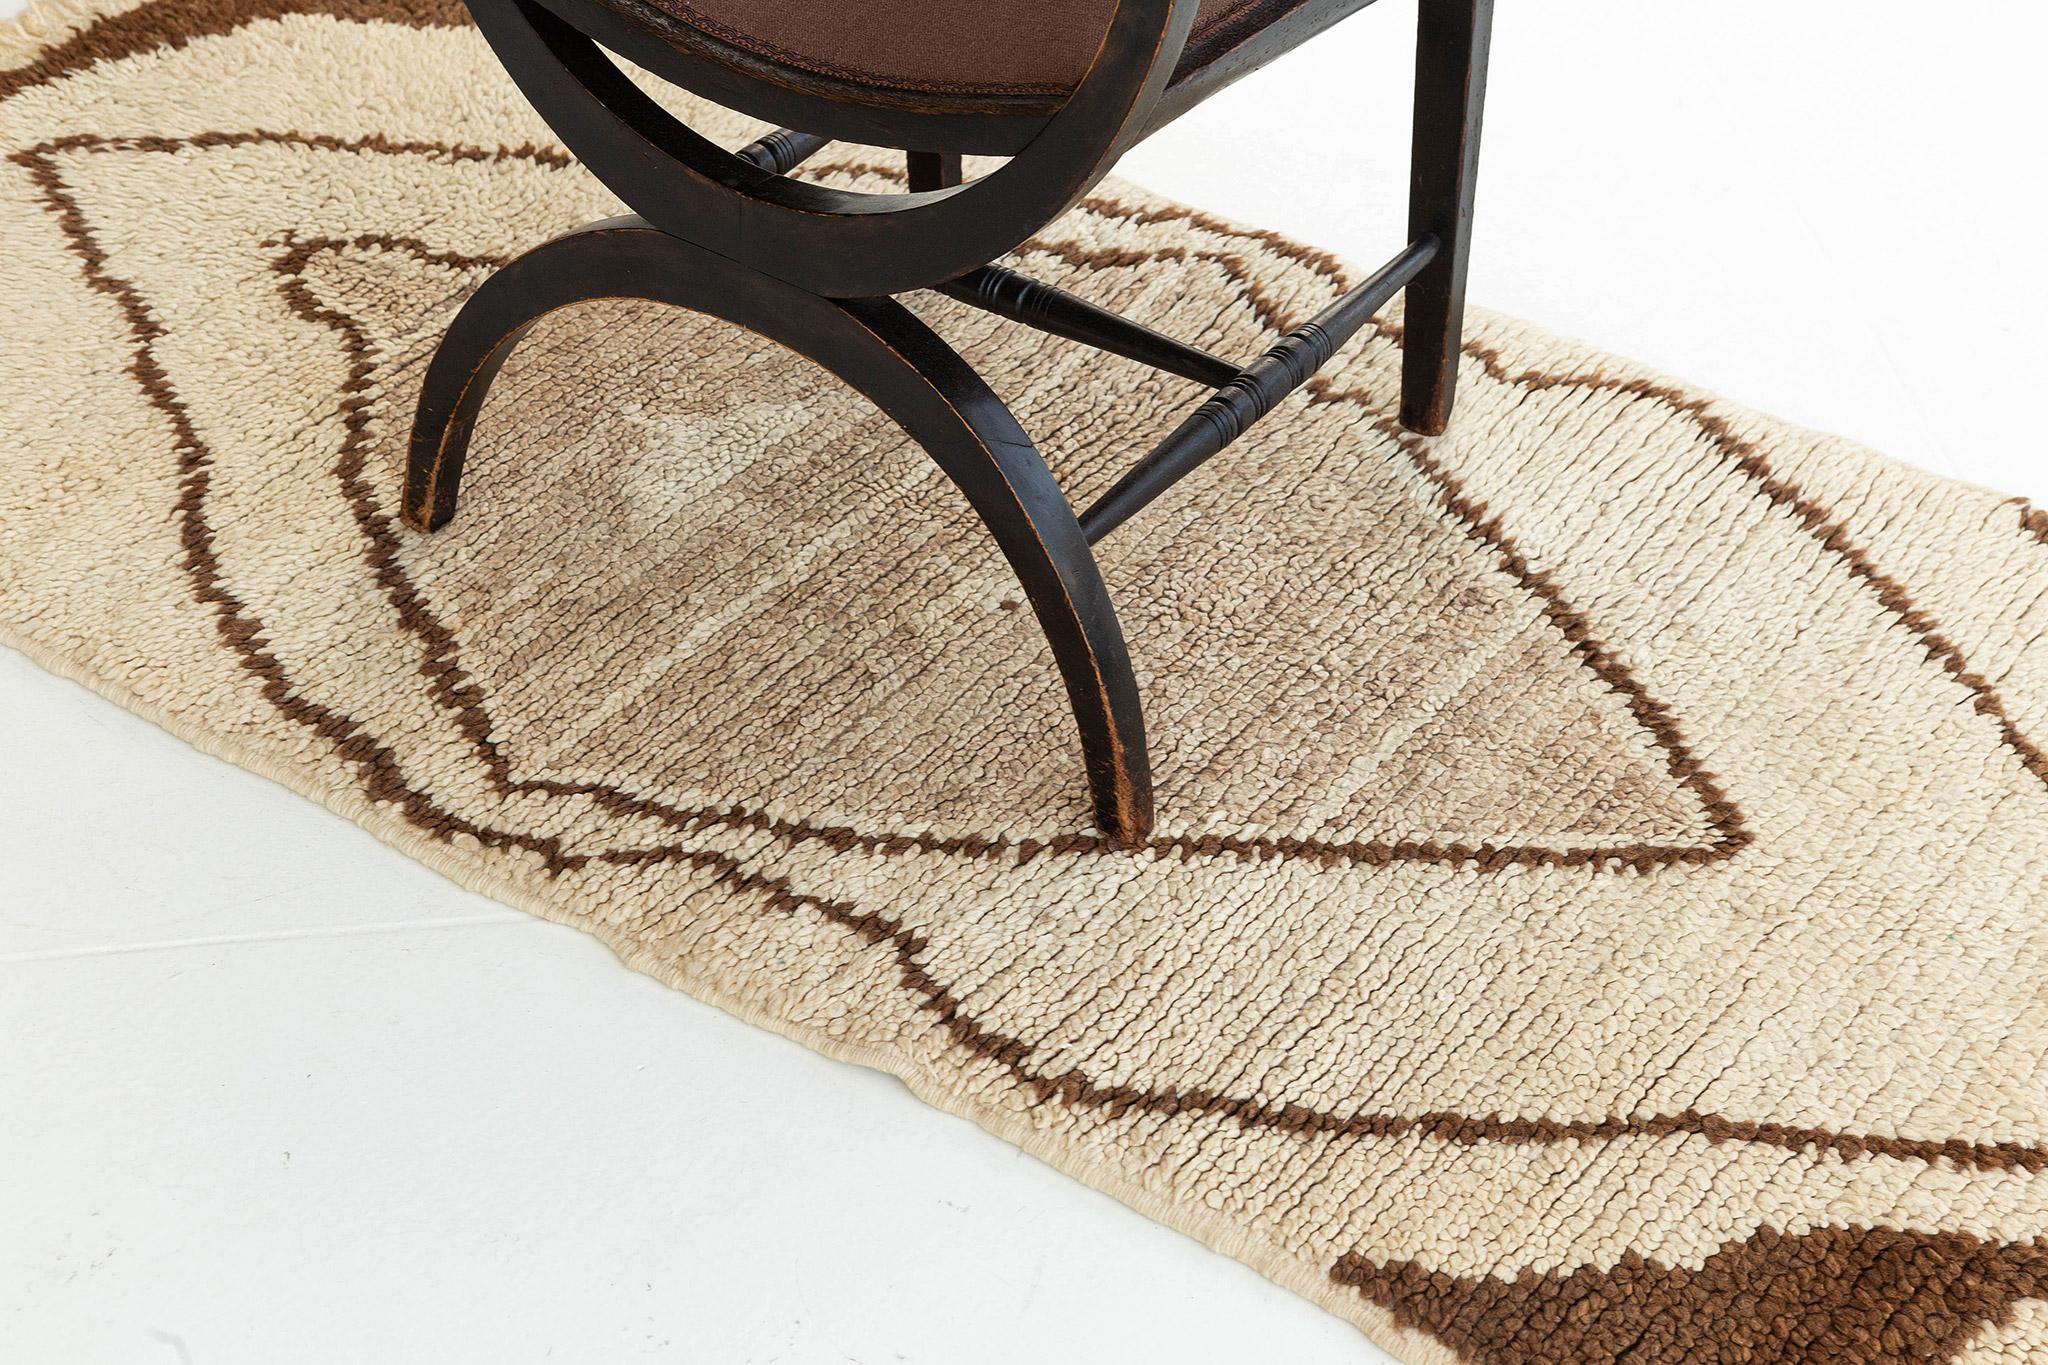 Ivory, tan, and natural brown pile rug with central diamond form and strong graphic impact. A unique vintage tribal rug from the Atlas Mountains of Morocco. 

Rug Number
27407
Size
2' 11